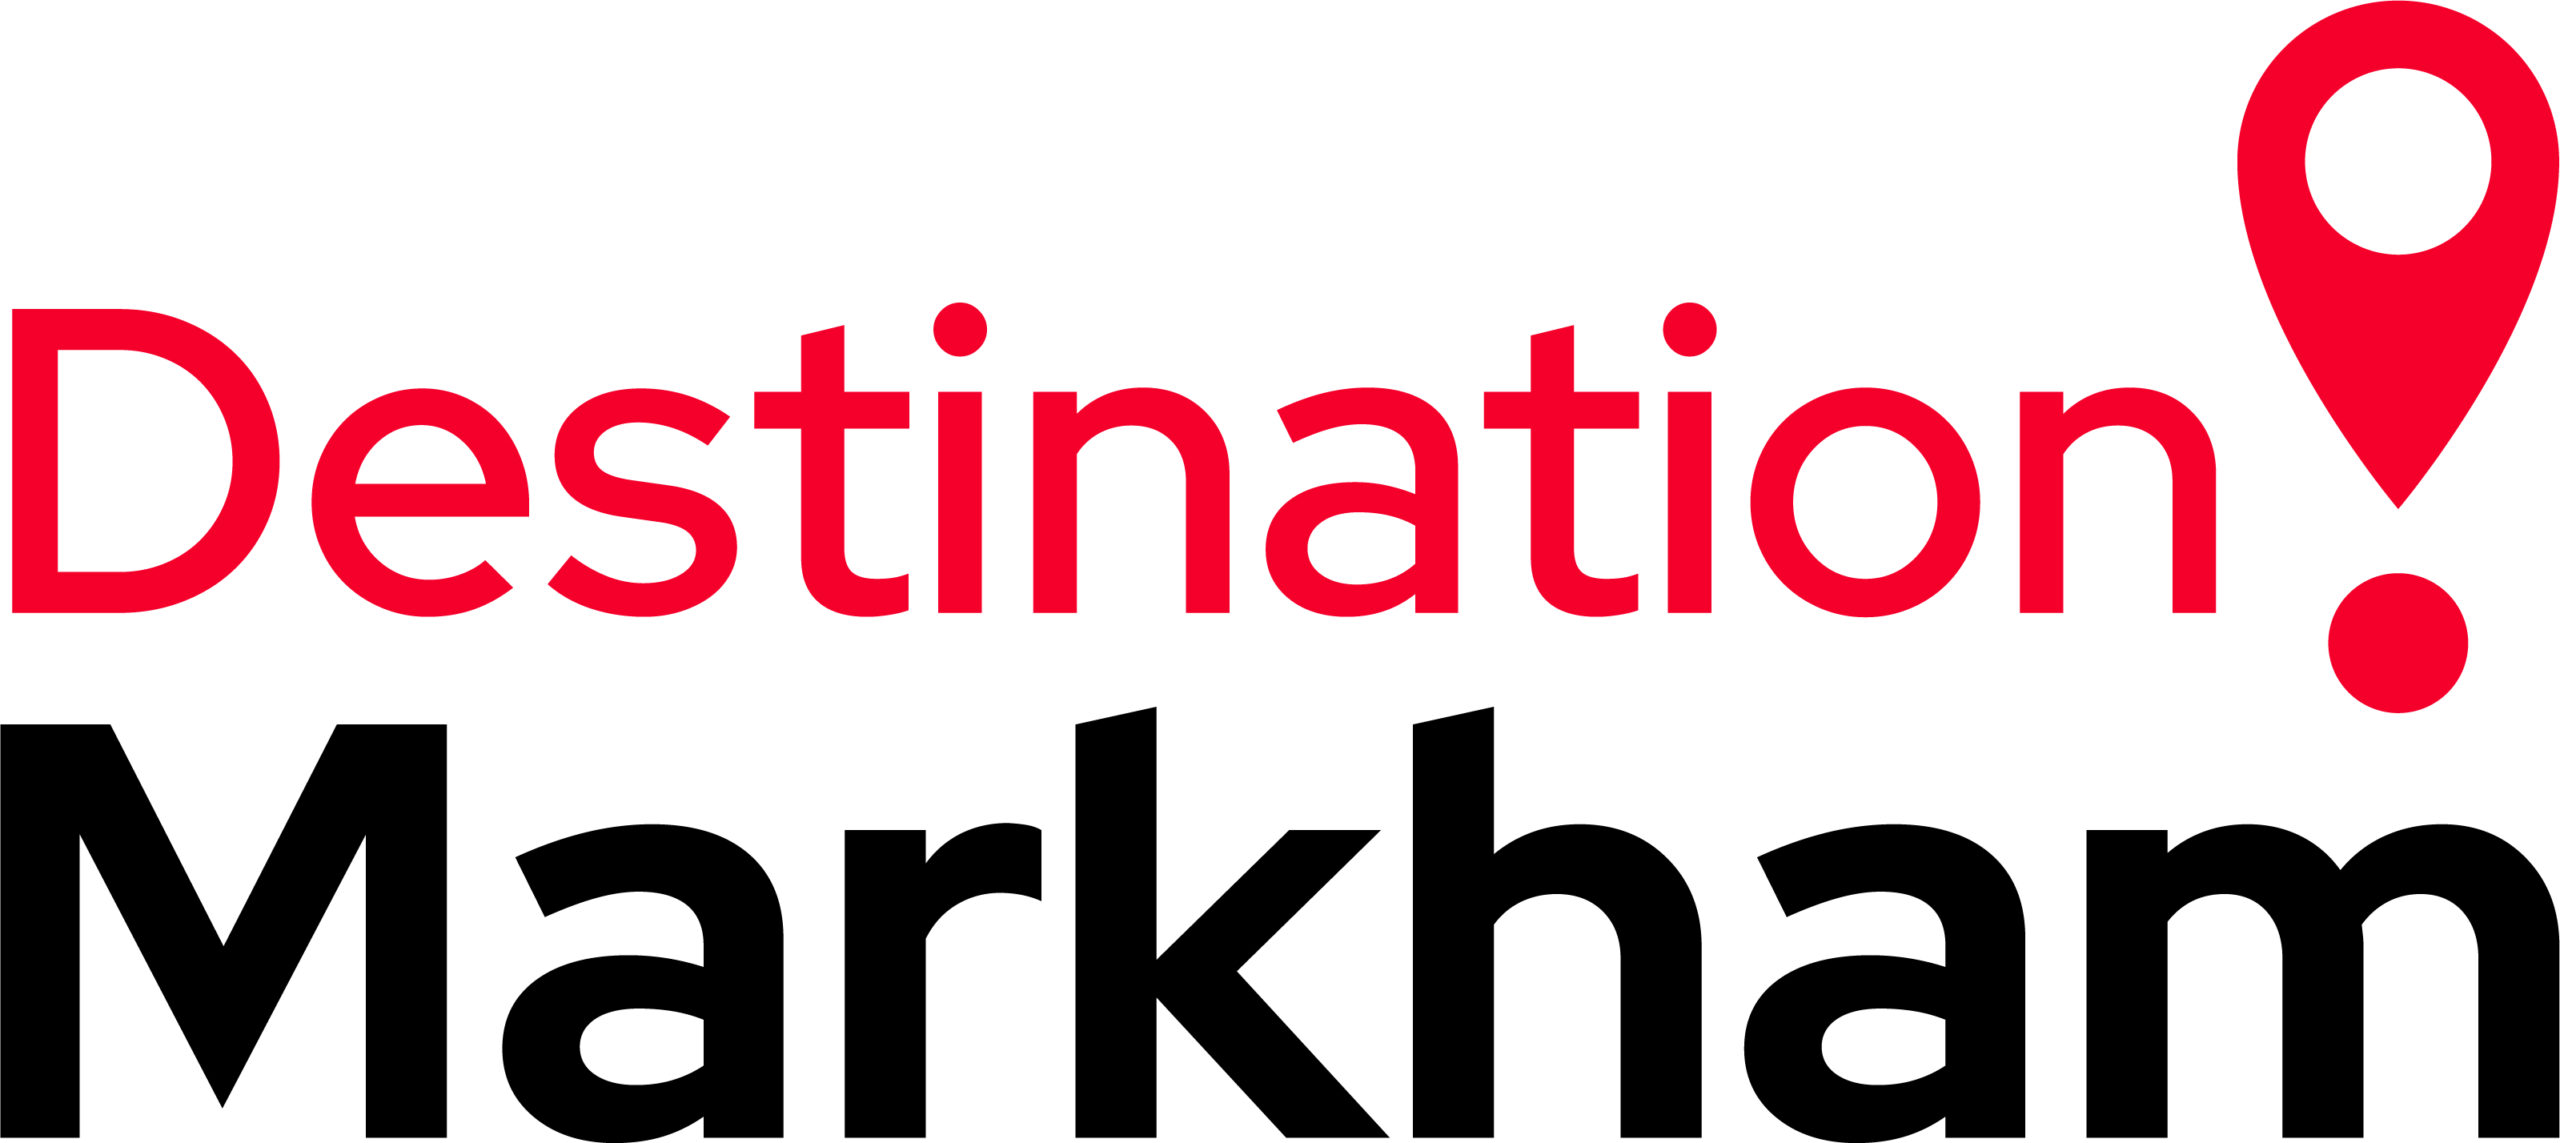 Joyride 150 Proudly receives support from Destination Markham